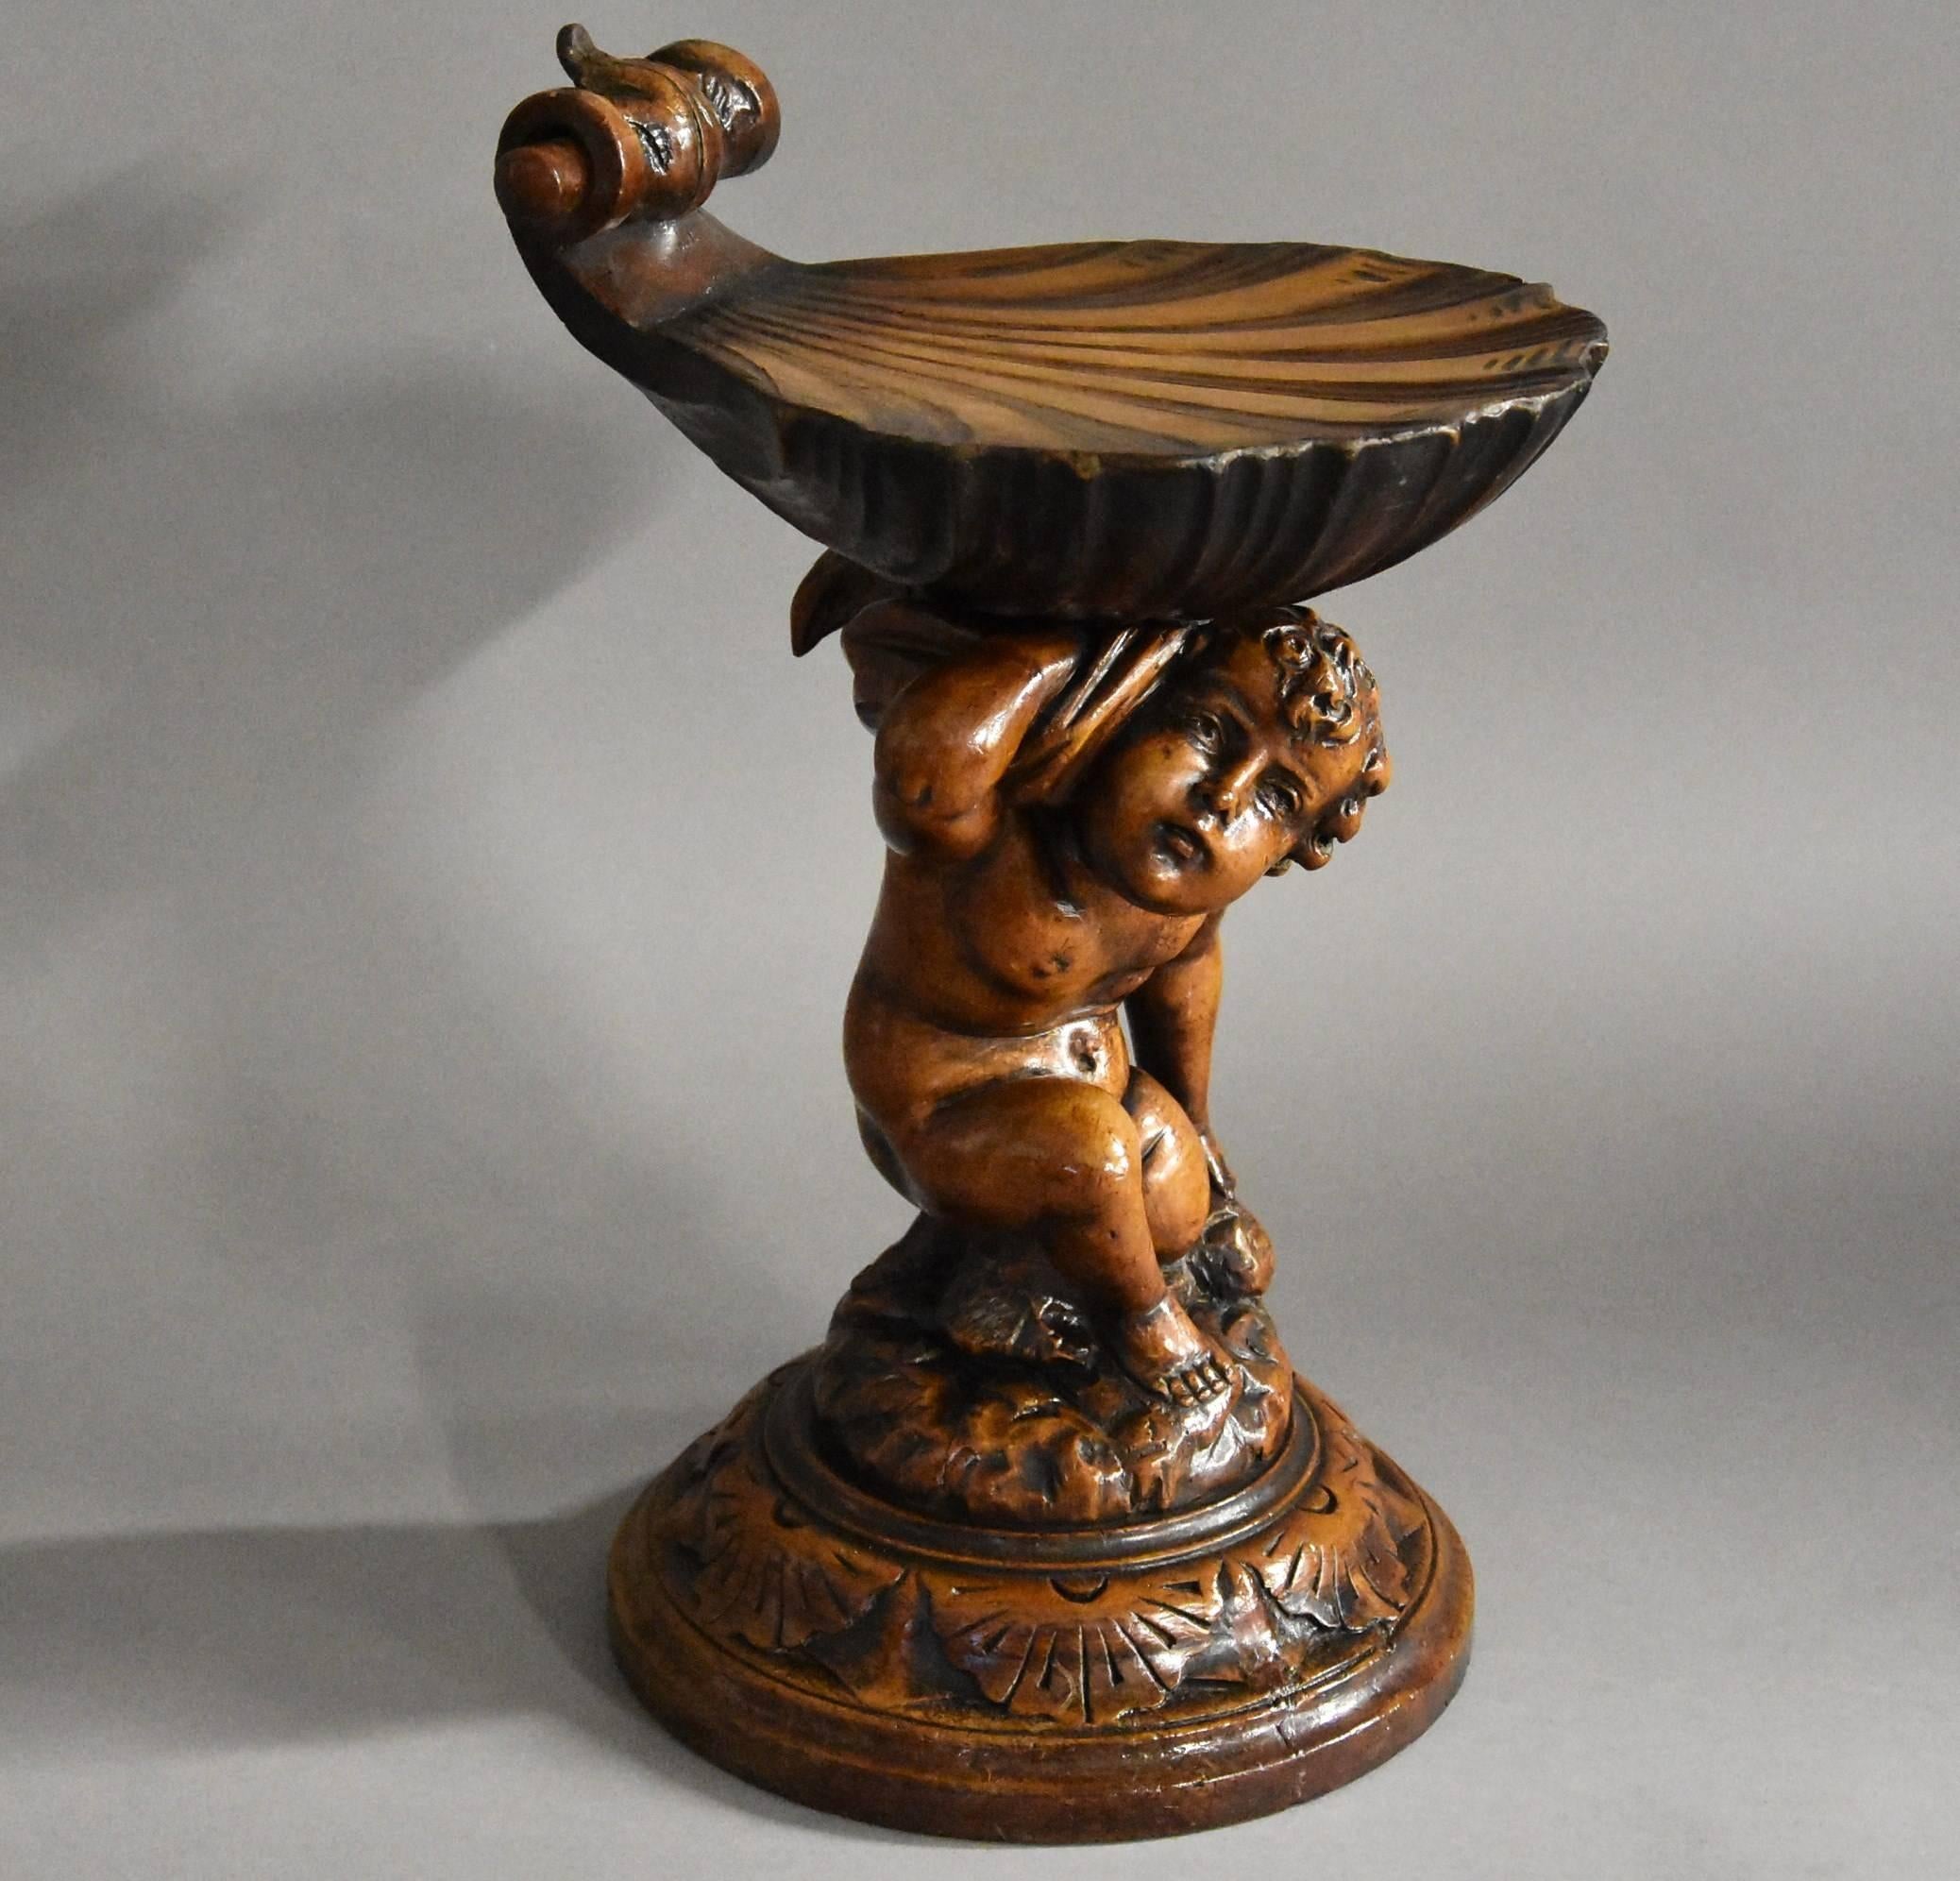 A highly decorative Venetian late 19th century pine putto and shell Grotto adjustable stool.

The stool consists of a carved scallop shell seat which is adjustable and revolving, this rests on the shoulders of the putto. 

This leads down to the